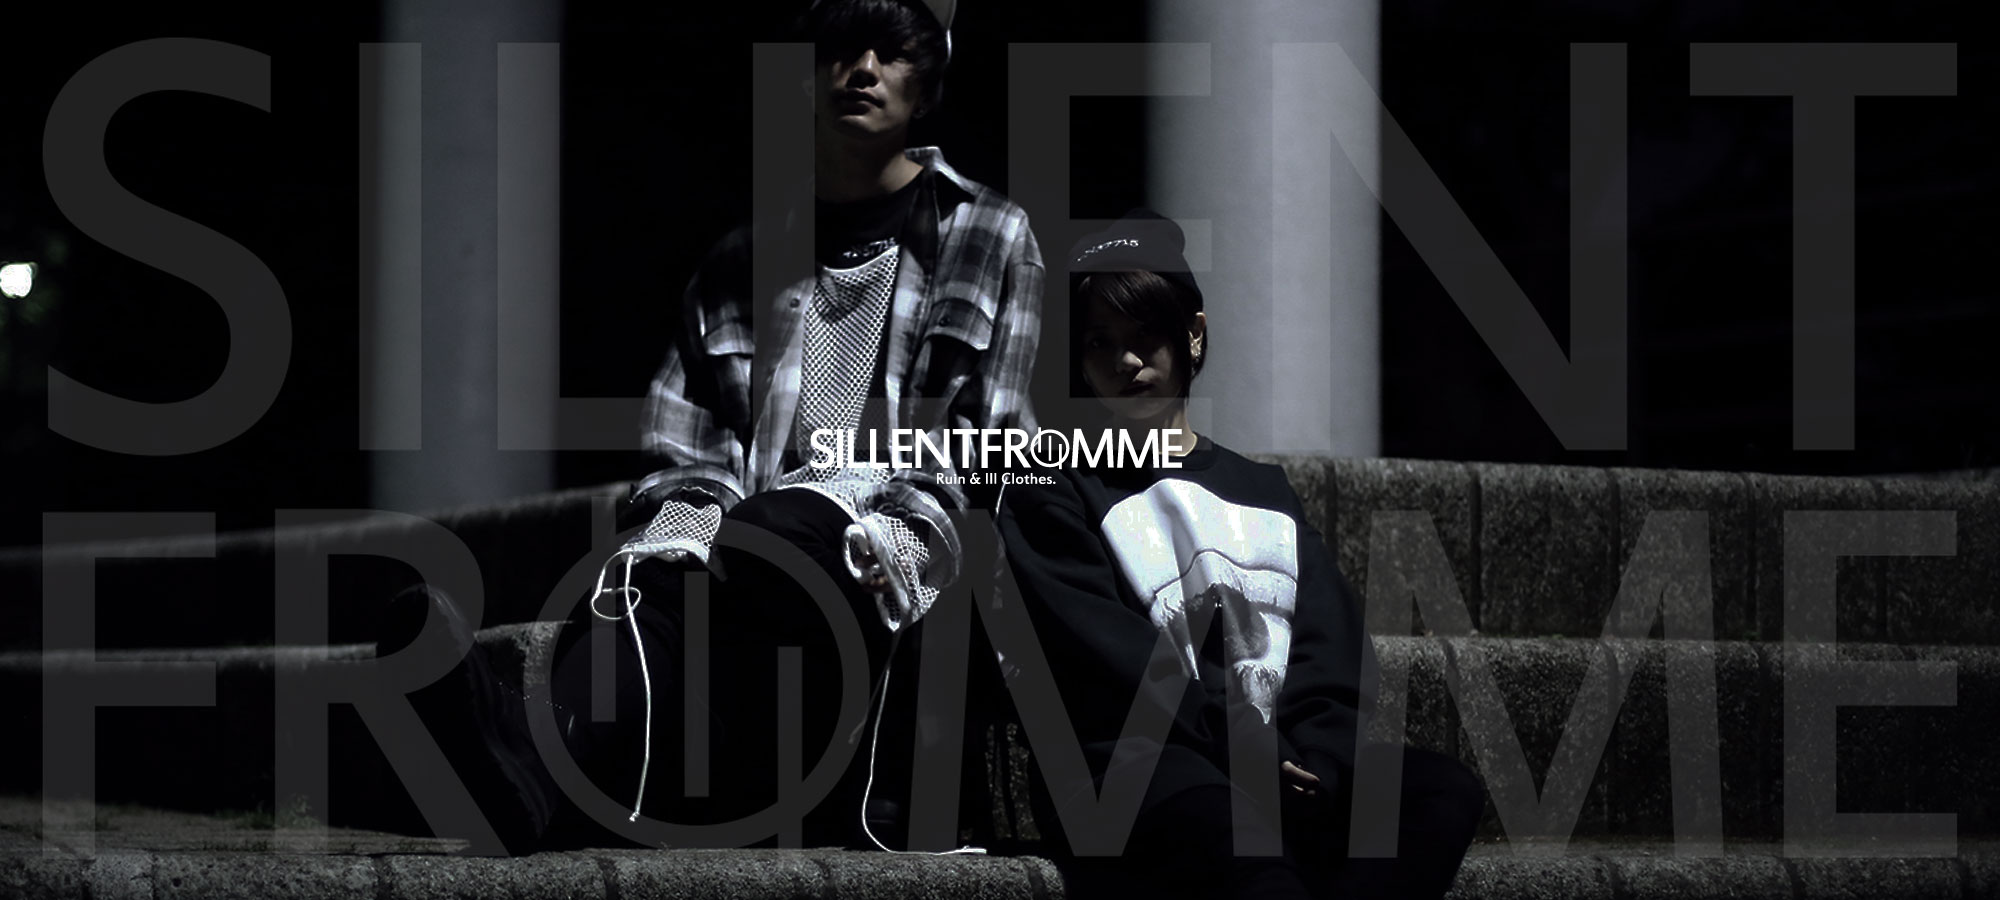 SILLENTFROMME,サイレントフロムミー